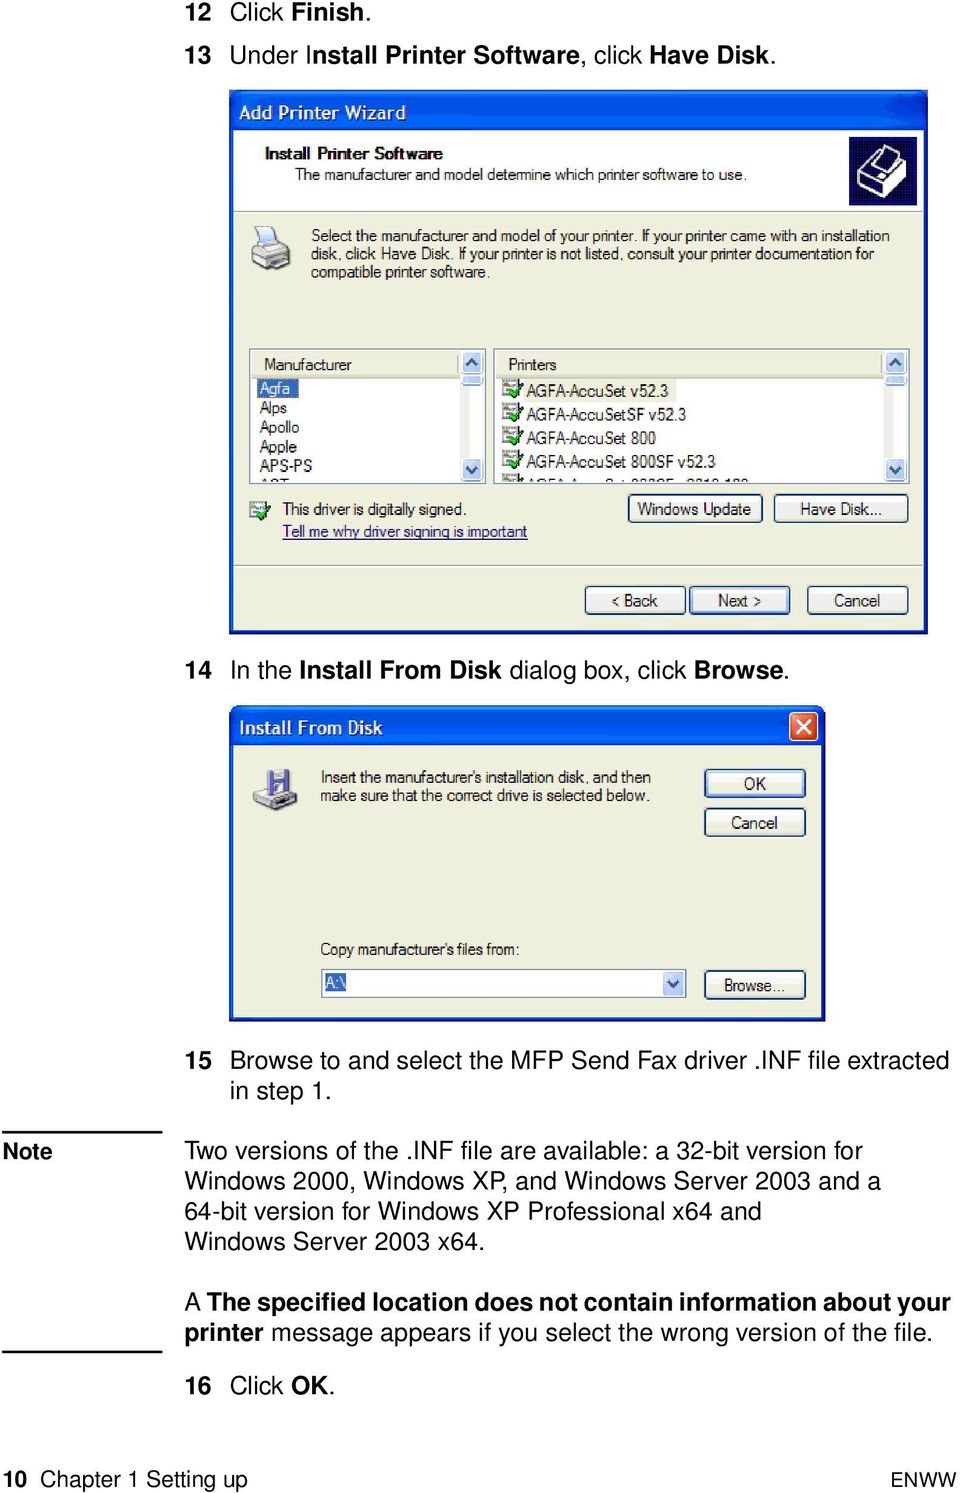 inf file are available: a 32-bit version for Windows 2000, Windows XP, and Windows Server 2003 and a 64-bit version for Windows XP Professional